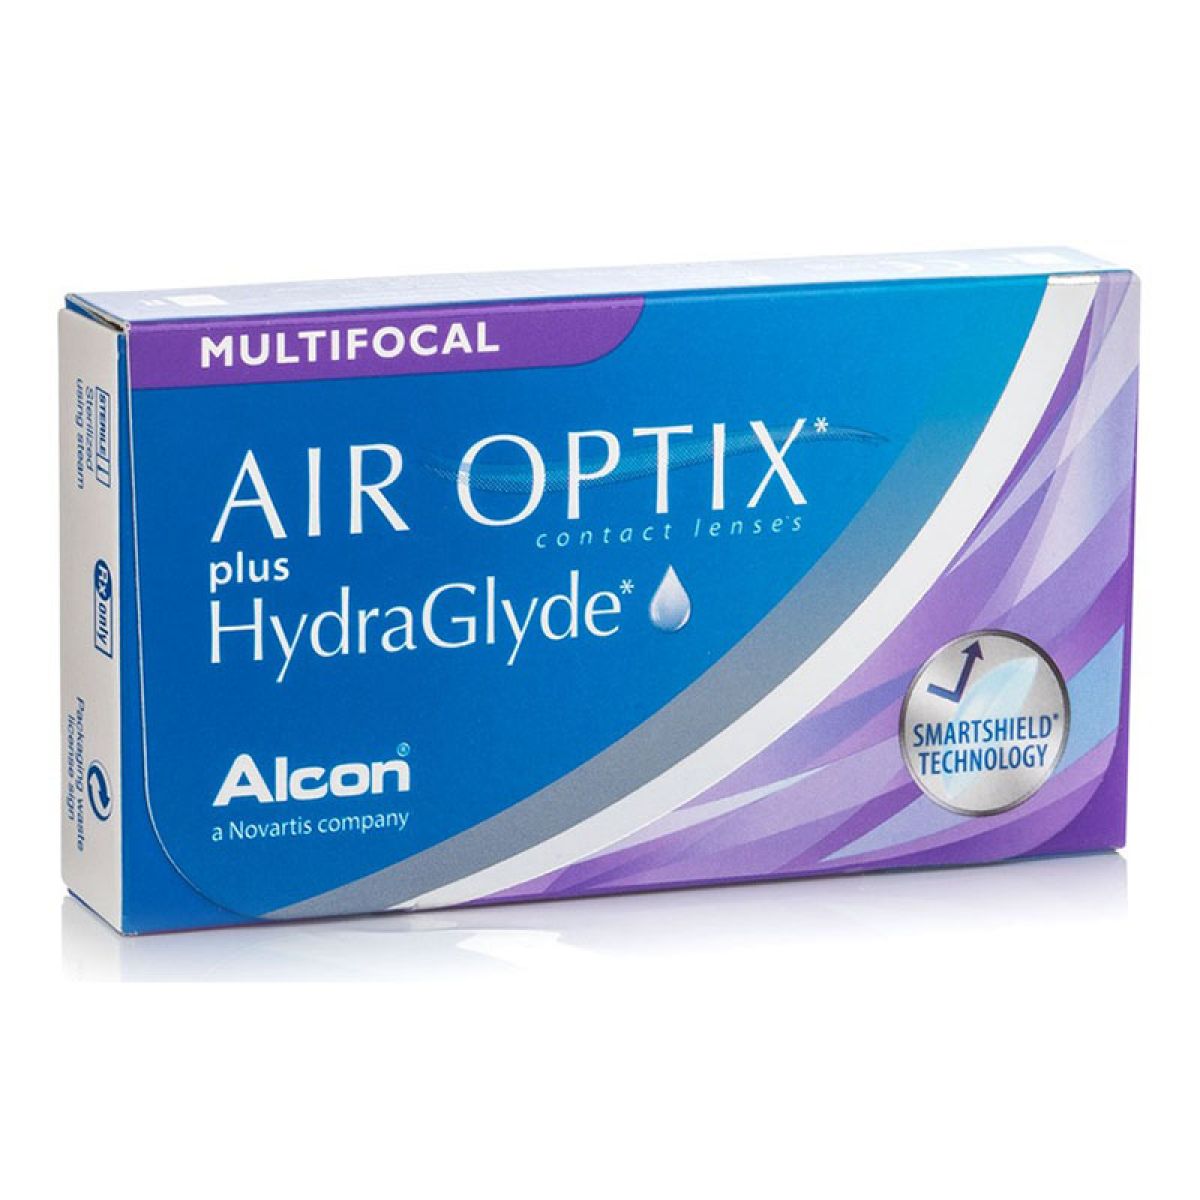 AIR OPTIX HYDRAGLYDE MULTIFOCAL MONTHLY DISPOSABLE MULTIFOCAL CONTACT LENSES (6 LENSES)